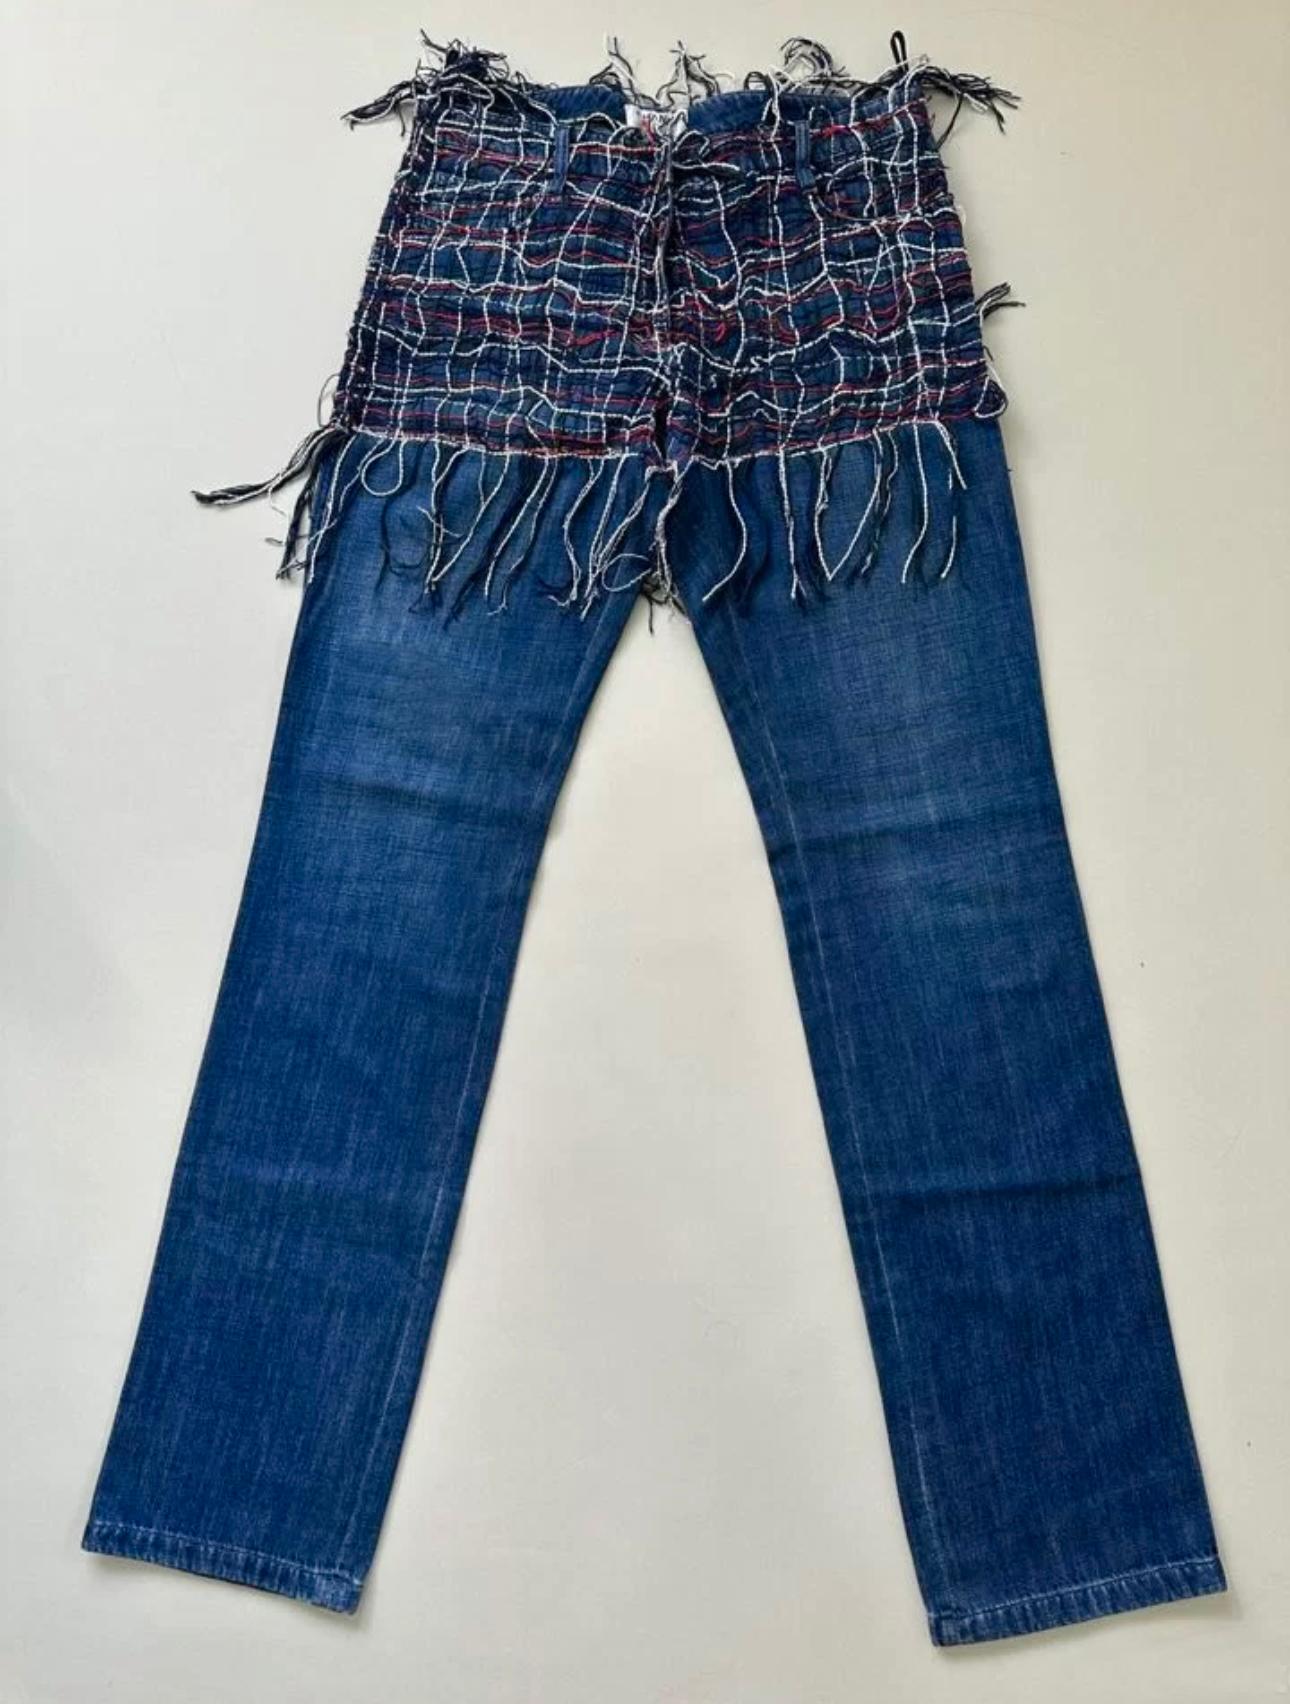 Chanel Runway Collectors Jeans with Tweed Accent 2